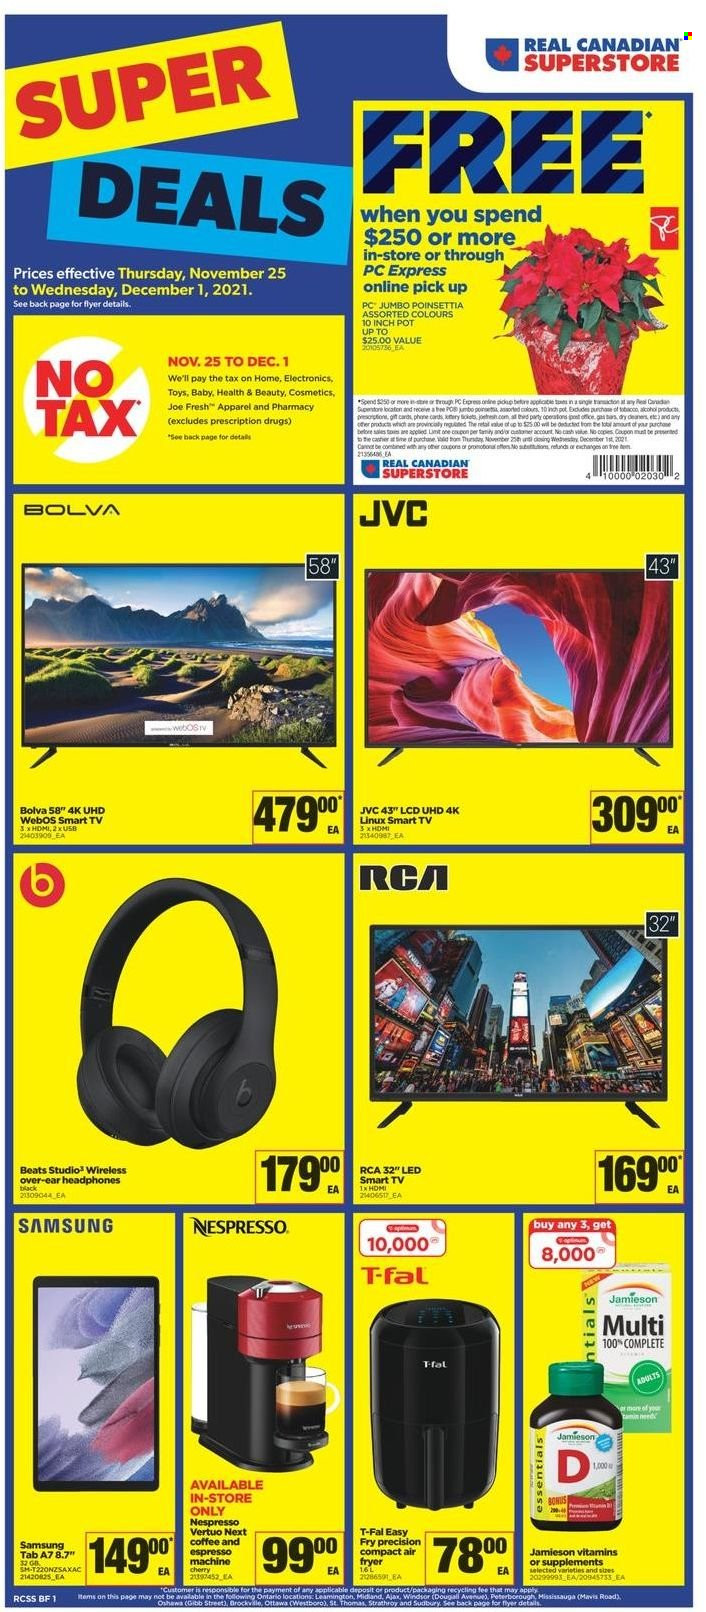 thumbnail - Real Canadian Superstore Flyer - November 25, 2021 - December 01, 2021 - Sales products - webos, cherries, coffee, Nespresso, pot, RCA, JVC, TV, Beats, headphones, air fryer, toys, poinsettia, smart tv. Page 1.